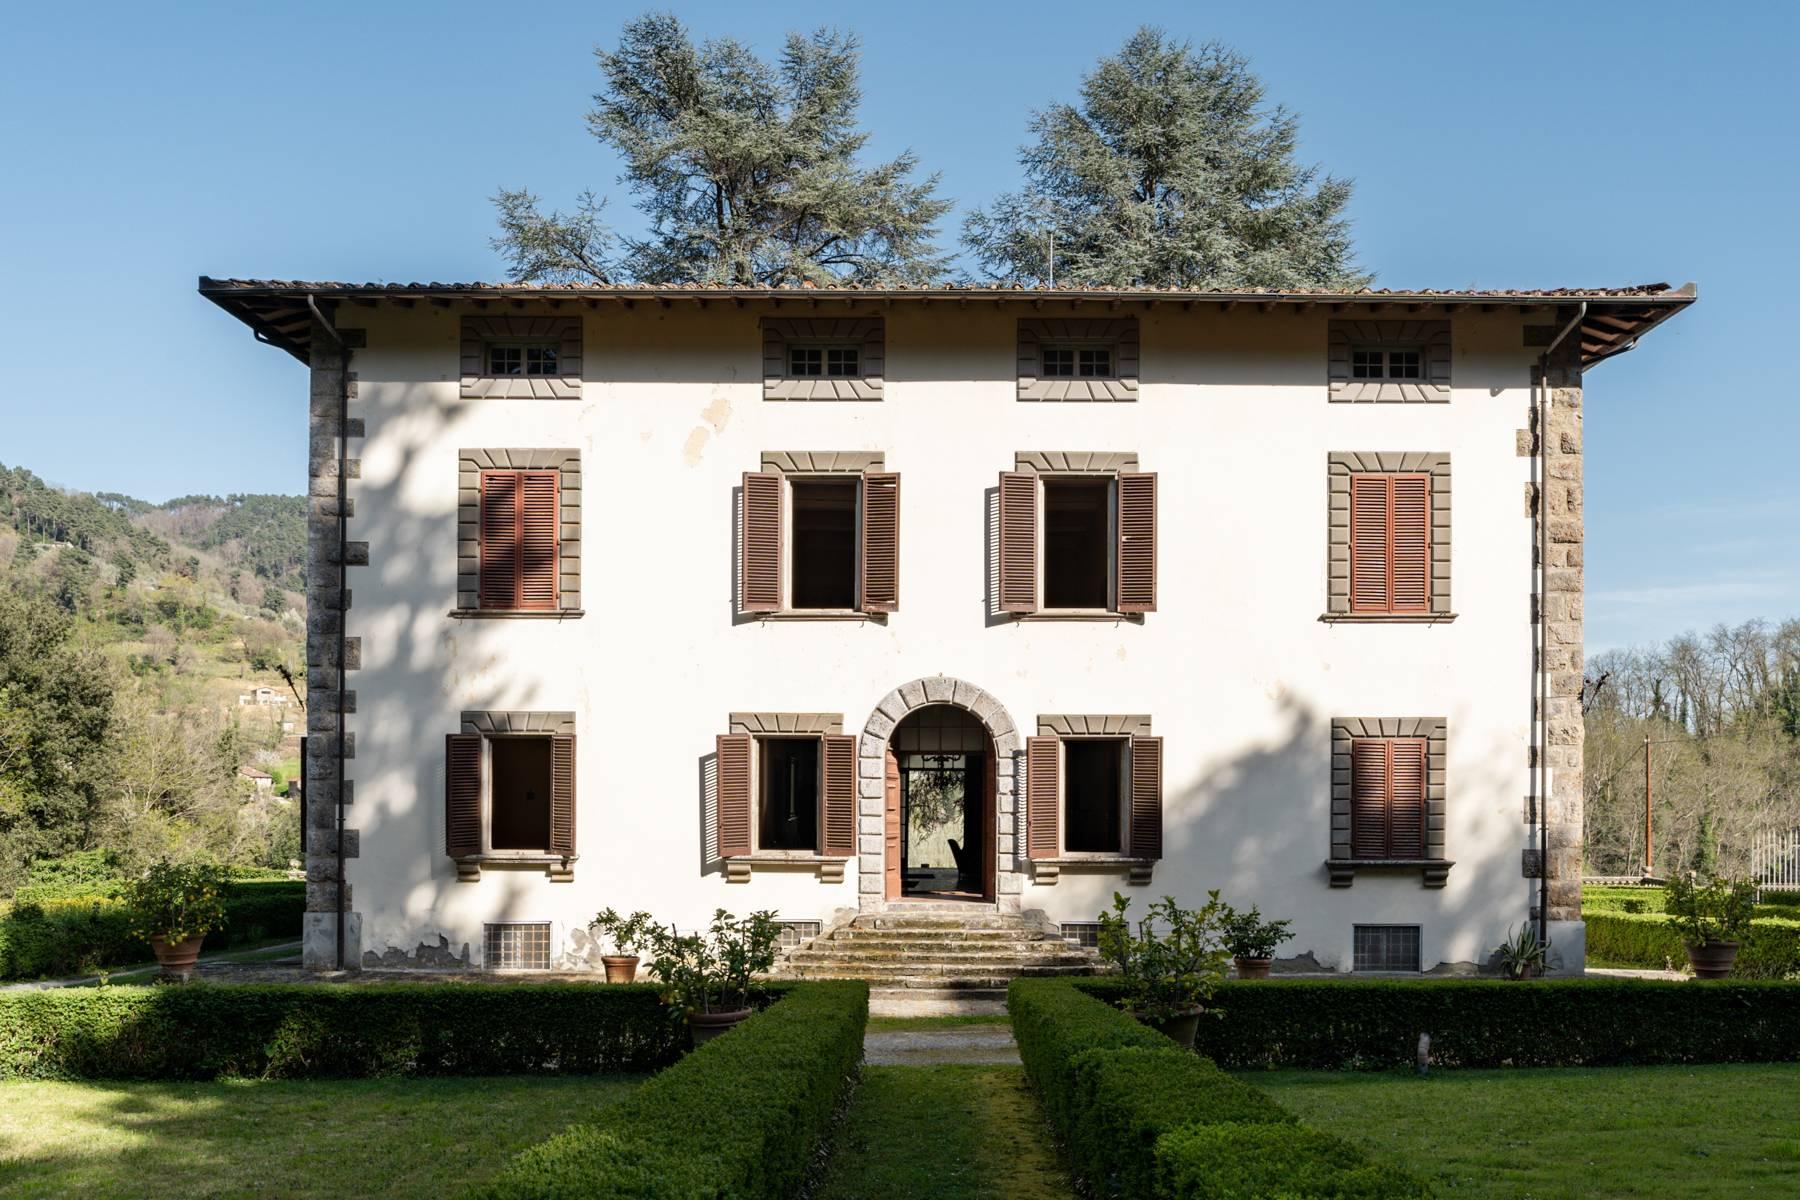 Prestigious Estate of the 16th century on the hills of Lucca - 27